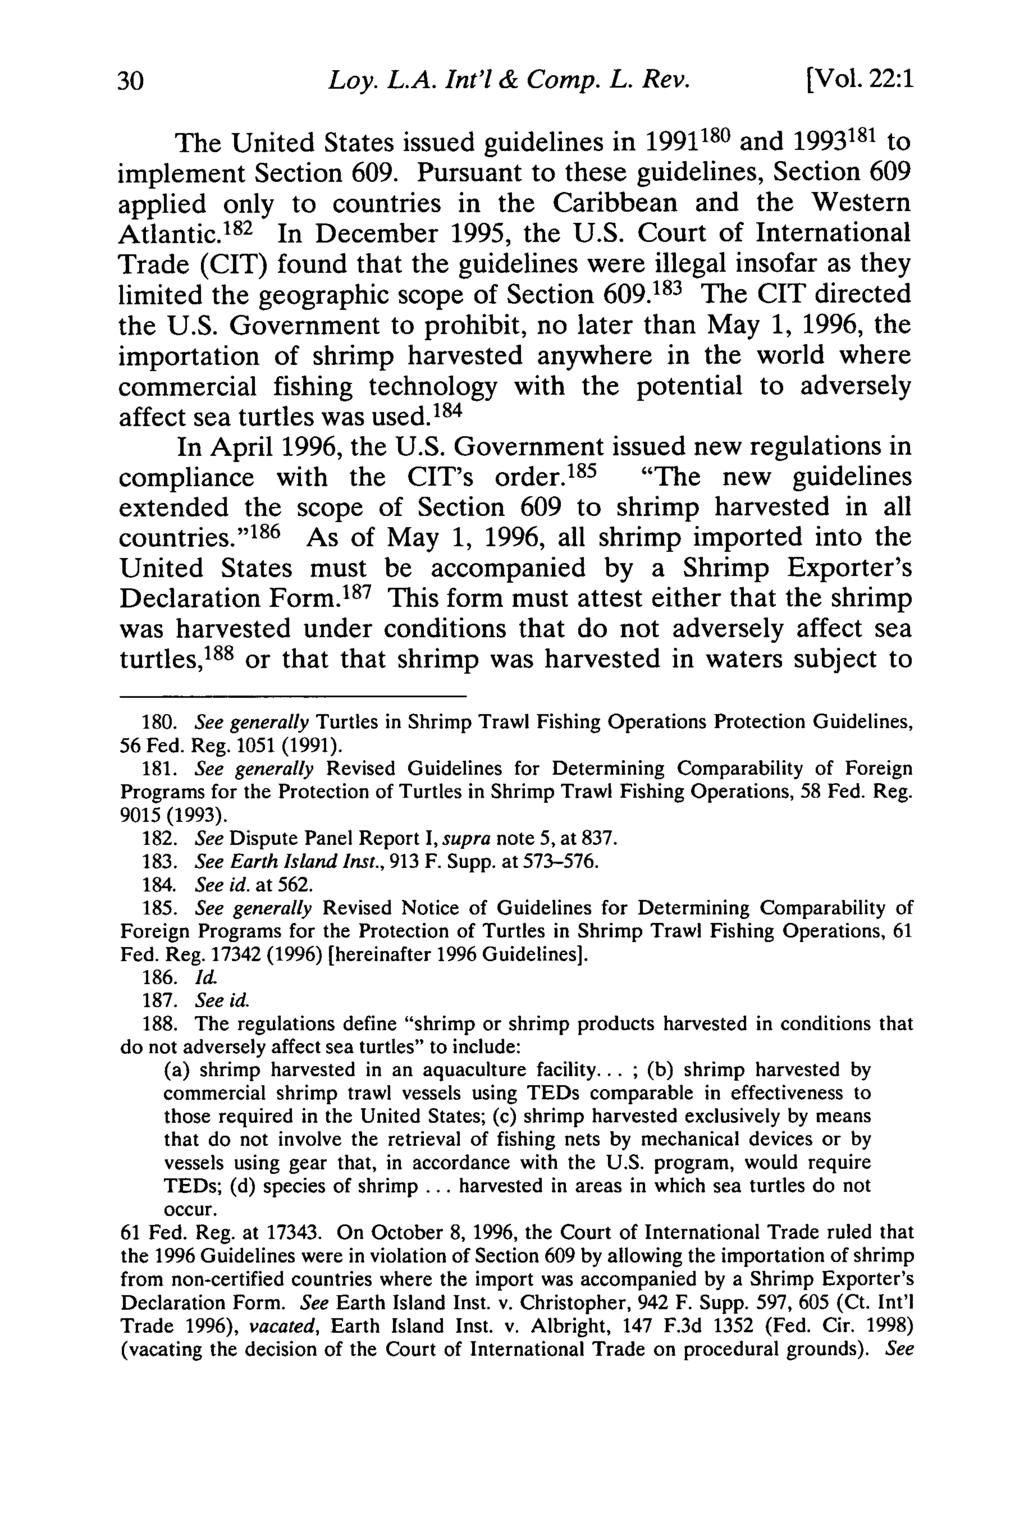 Loy. L.A. Int'l & Comp. L. Rev. [Vol. 22:1 The United States issued guidelines in 1991180 and 1993181 to implement Section 609.